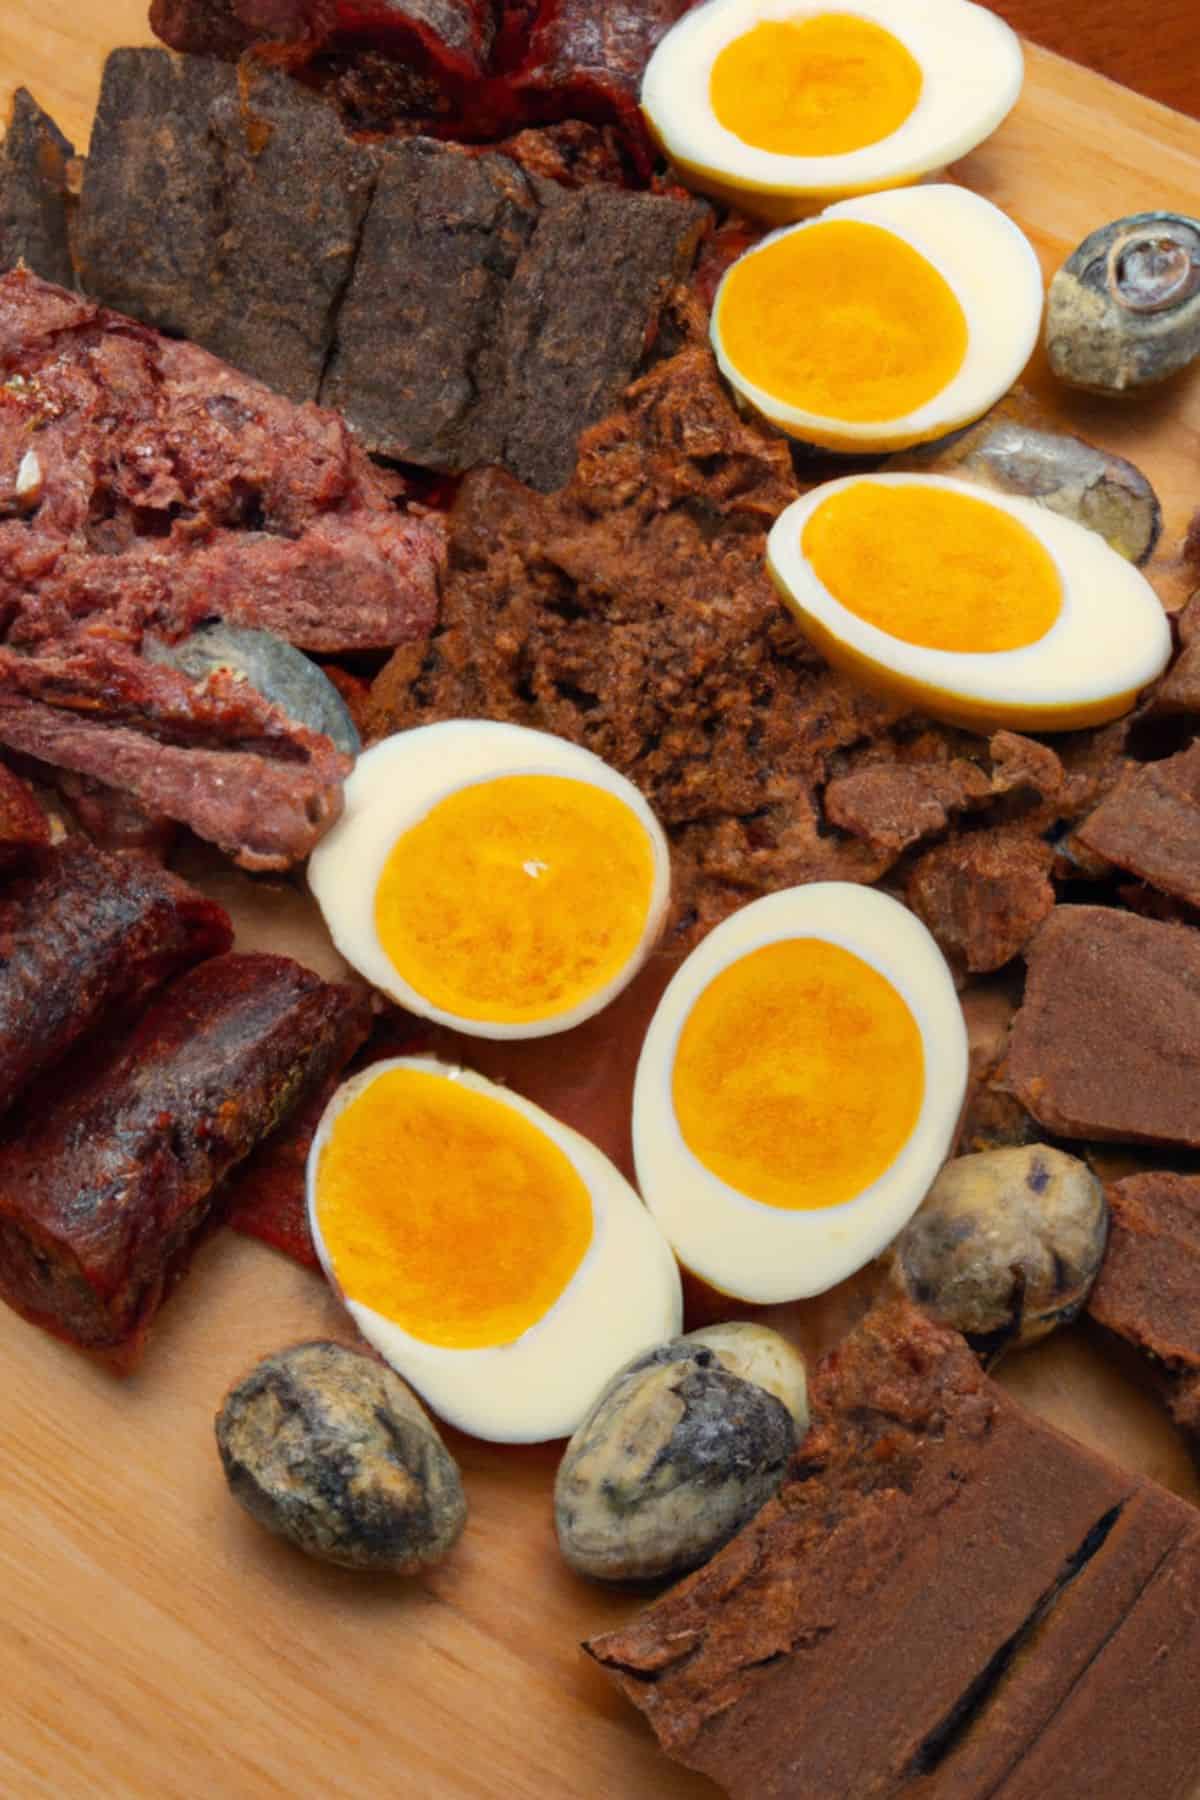 Cutting board topped with a variety of carnivore diet snacks like boiled eggs and meats.